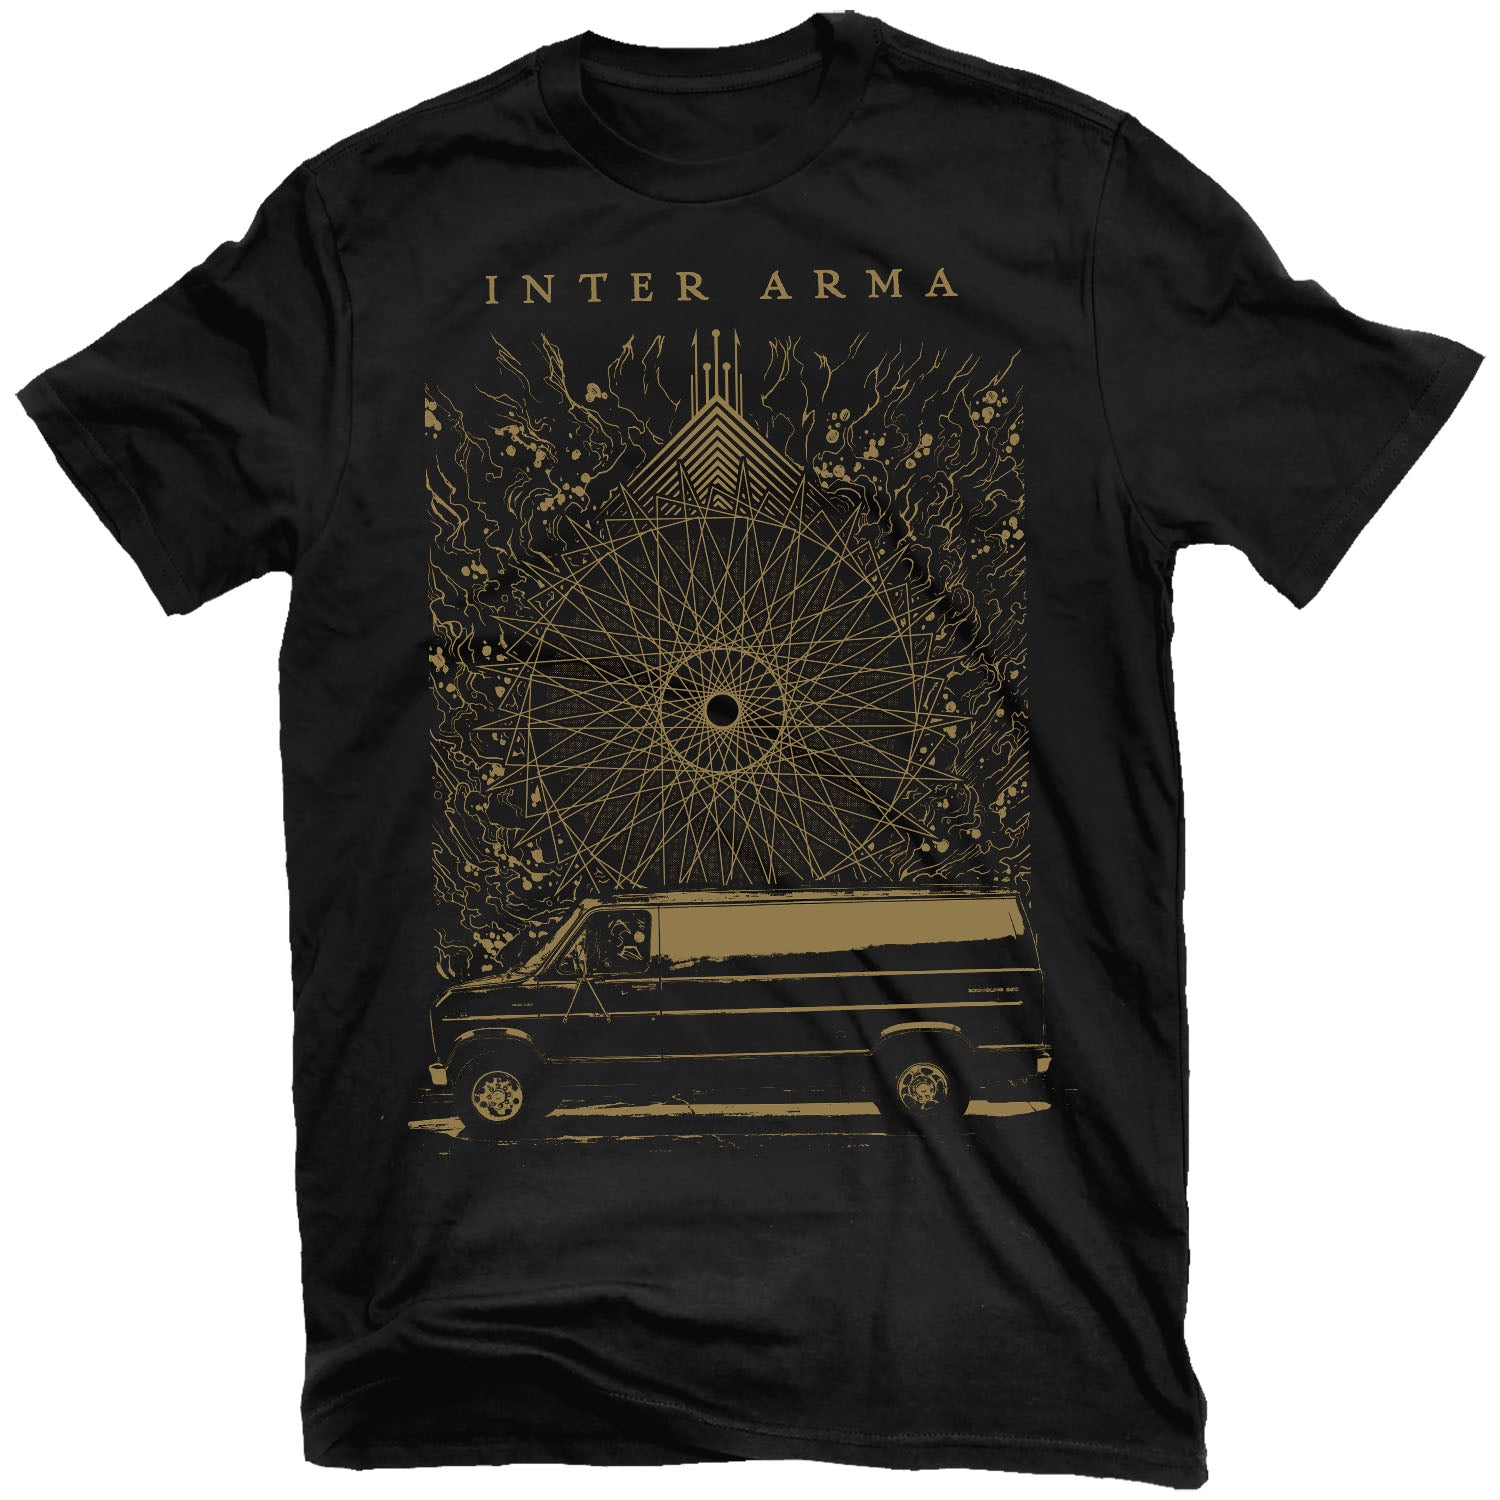 Inter Arma "Garbers Days Revisited" T-Shirt